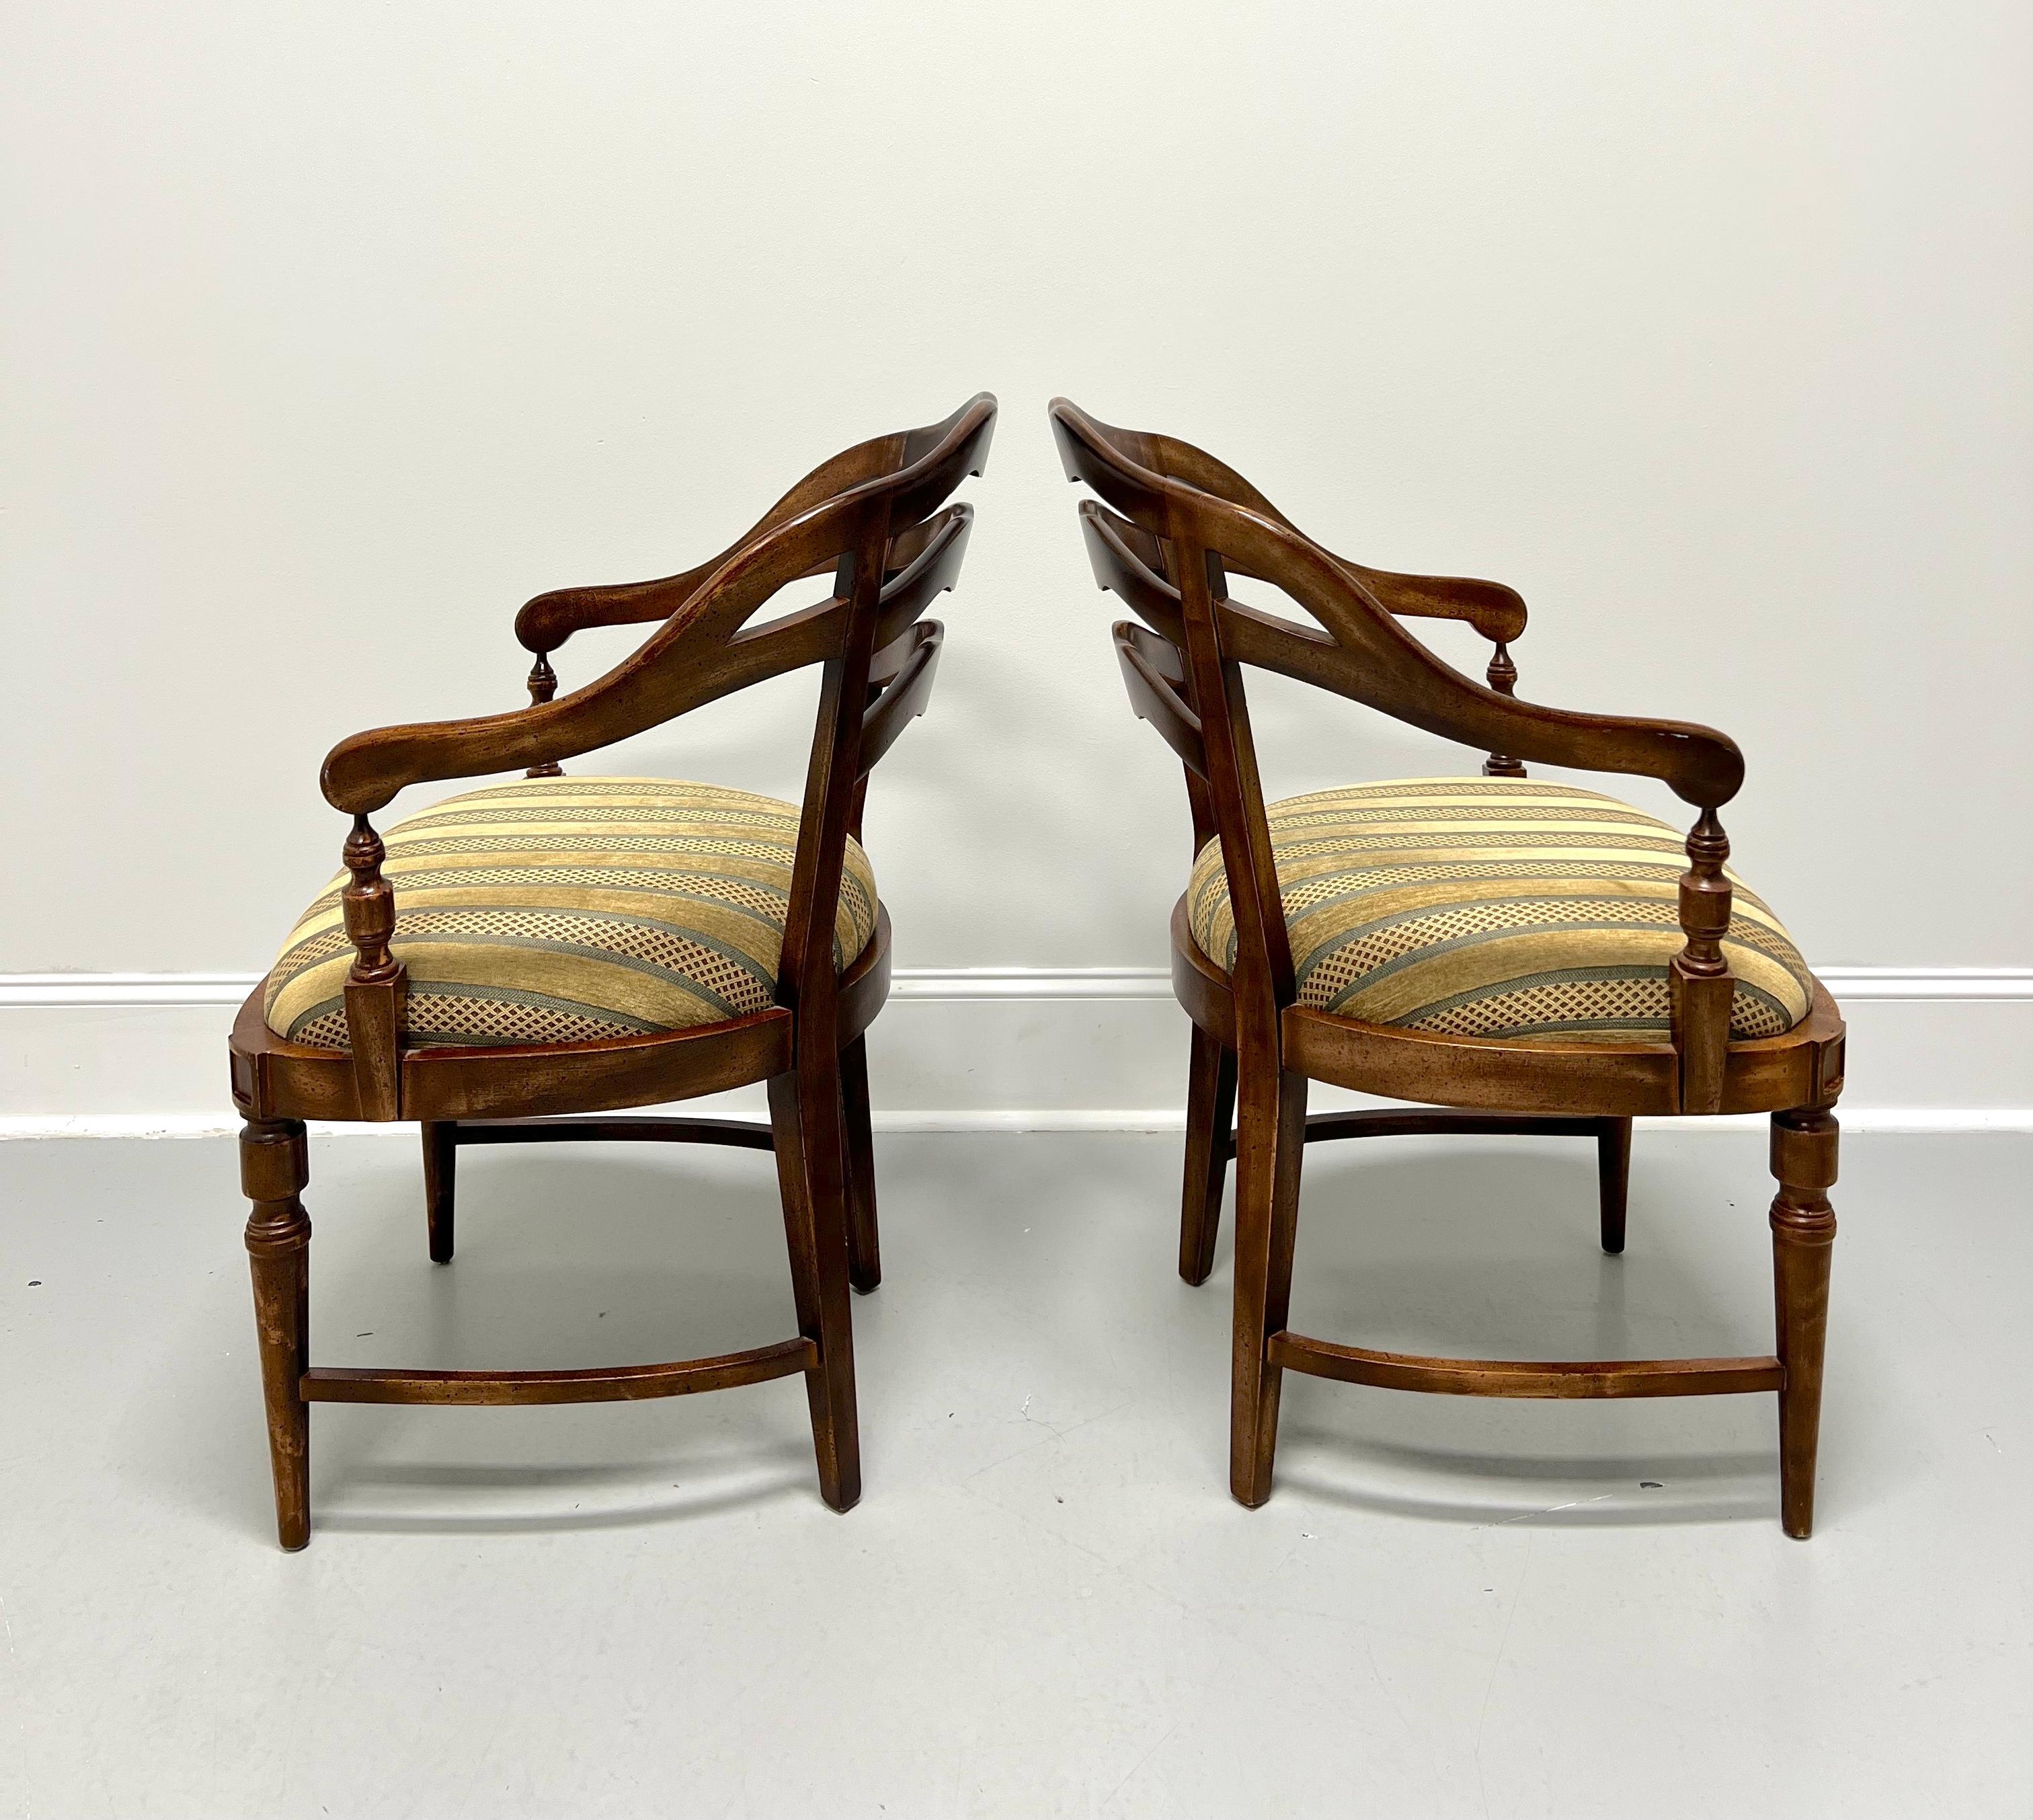 Mid 20th Century Maple French Country Barrel Chairs - Pair In Good Condition For Sale In Charlotte, NC